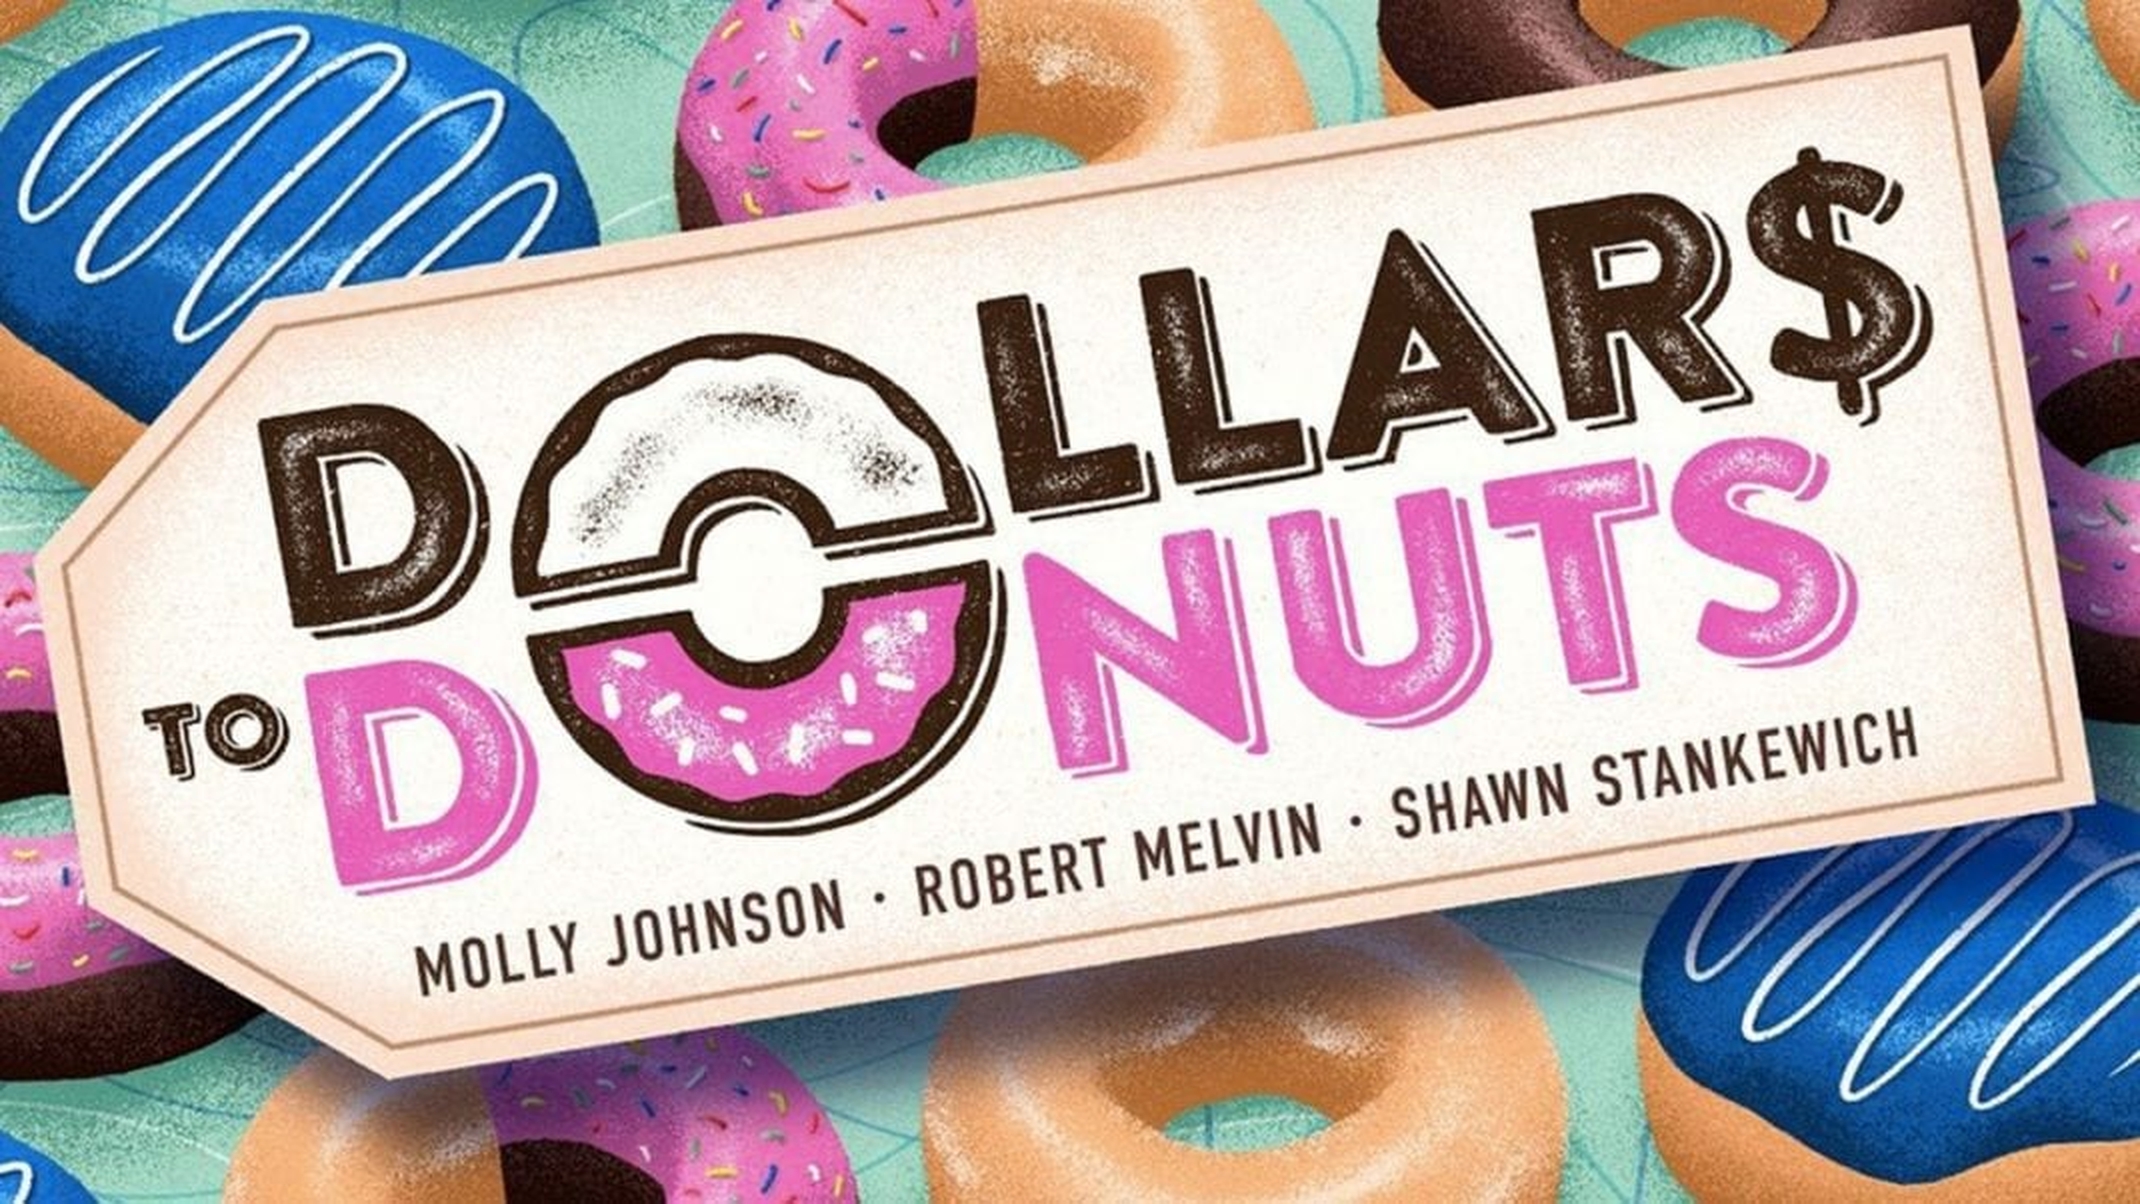 Dollars to Donuts demo